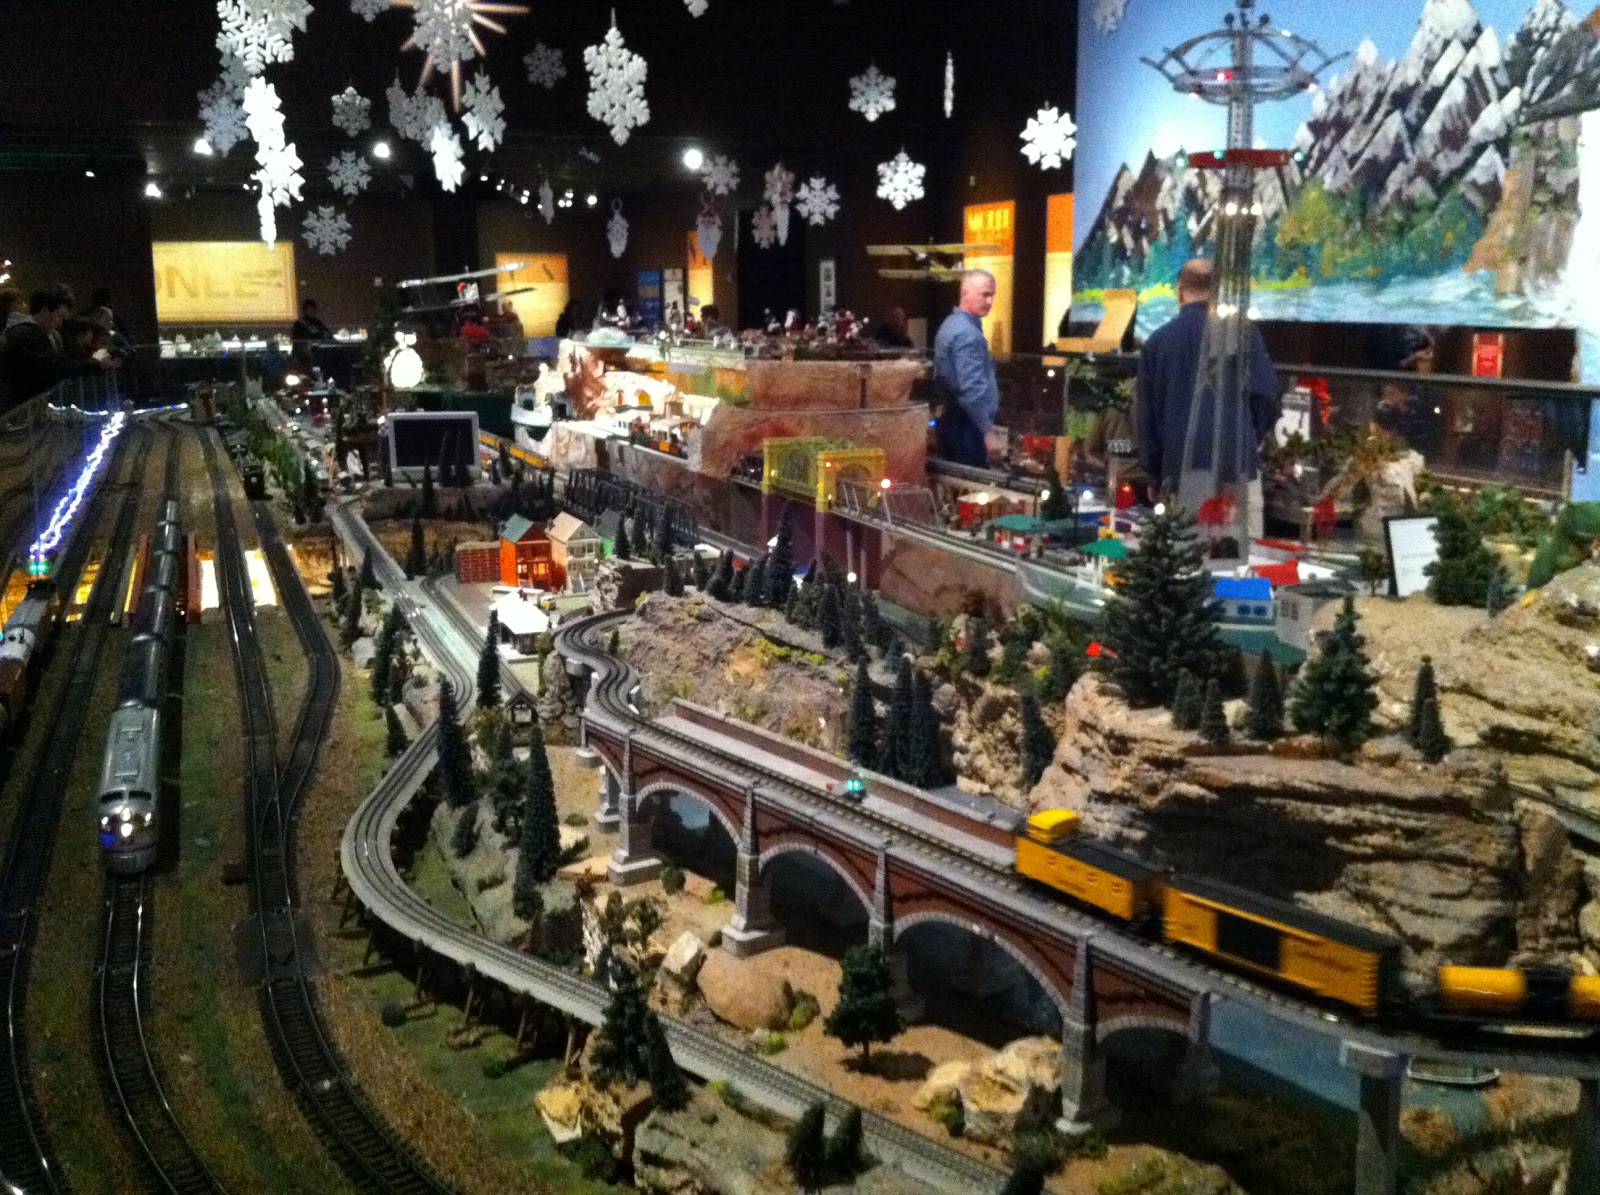 Huge layouts of model trains at Kansas City's Union Station yesterday